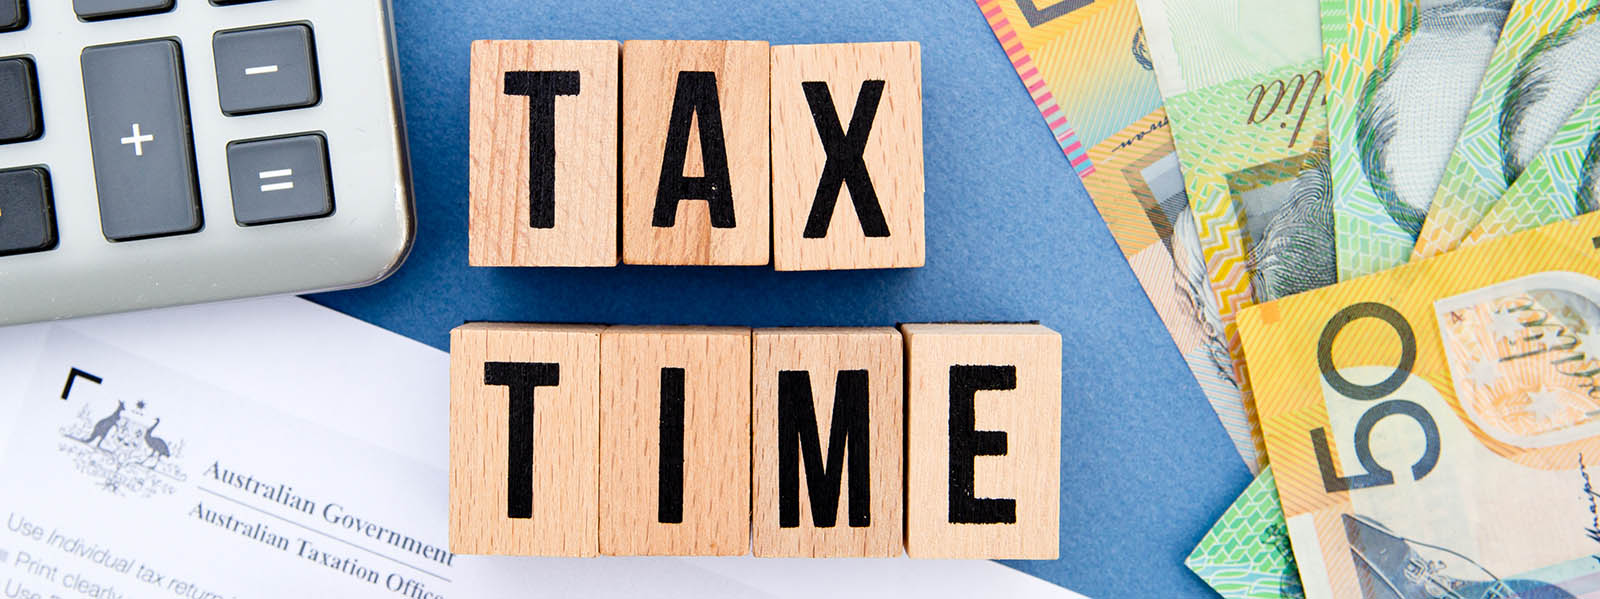 Tax Time Resources